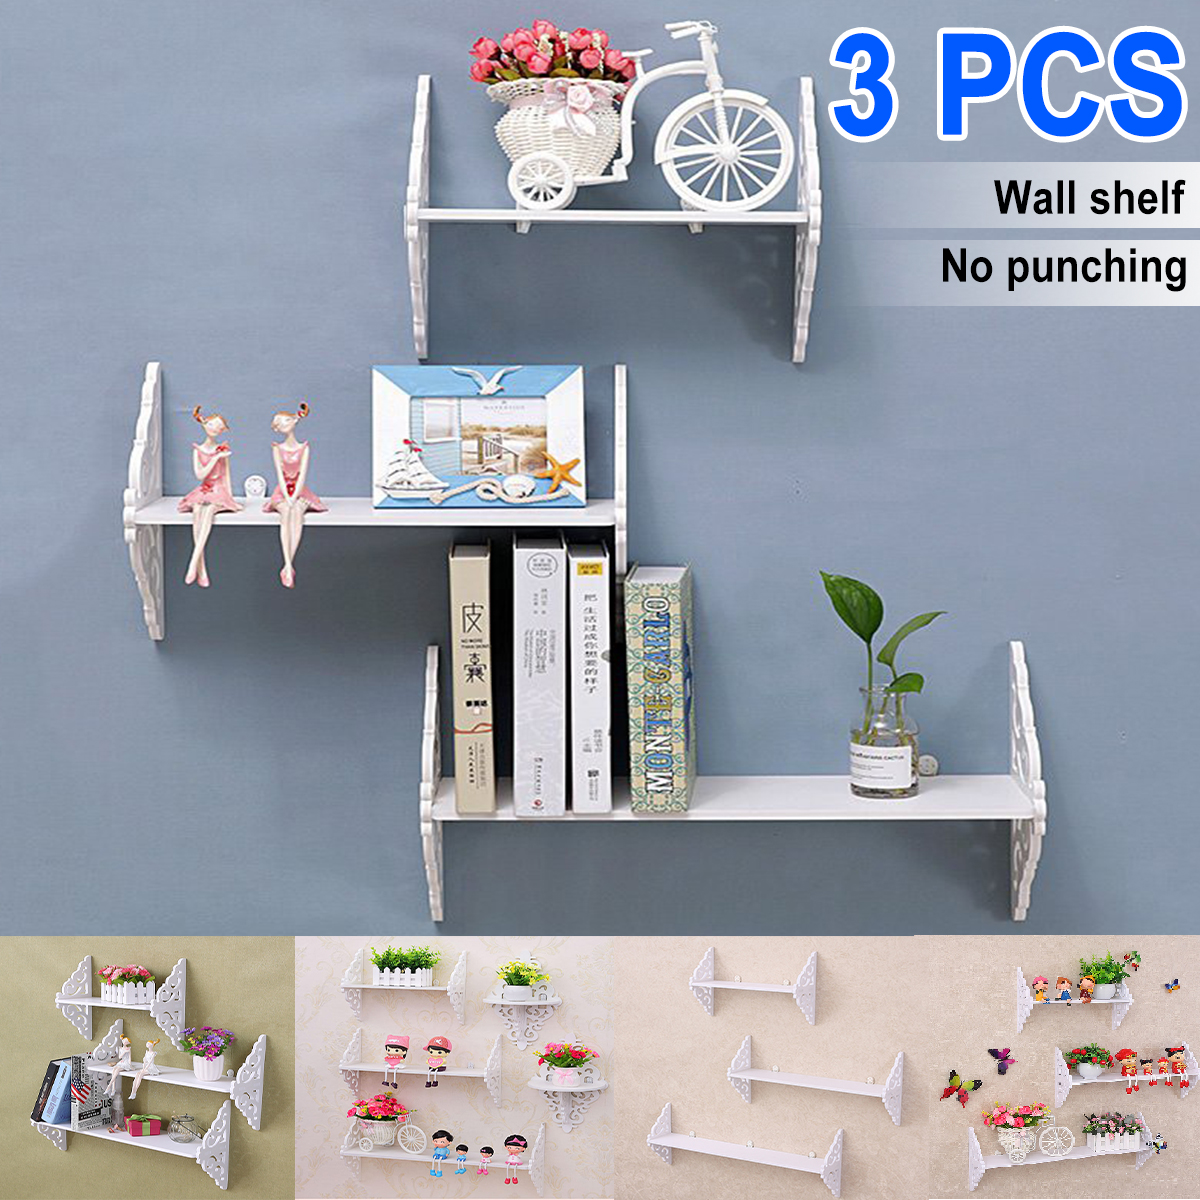 3Pcs-Punch-free-Wood-Carved-Wall-Shelves-Hanging-Rack-for-Home-Living-Room-Bedroom-Study-Decorations-1731665-1